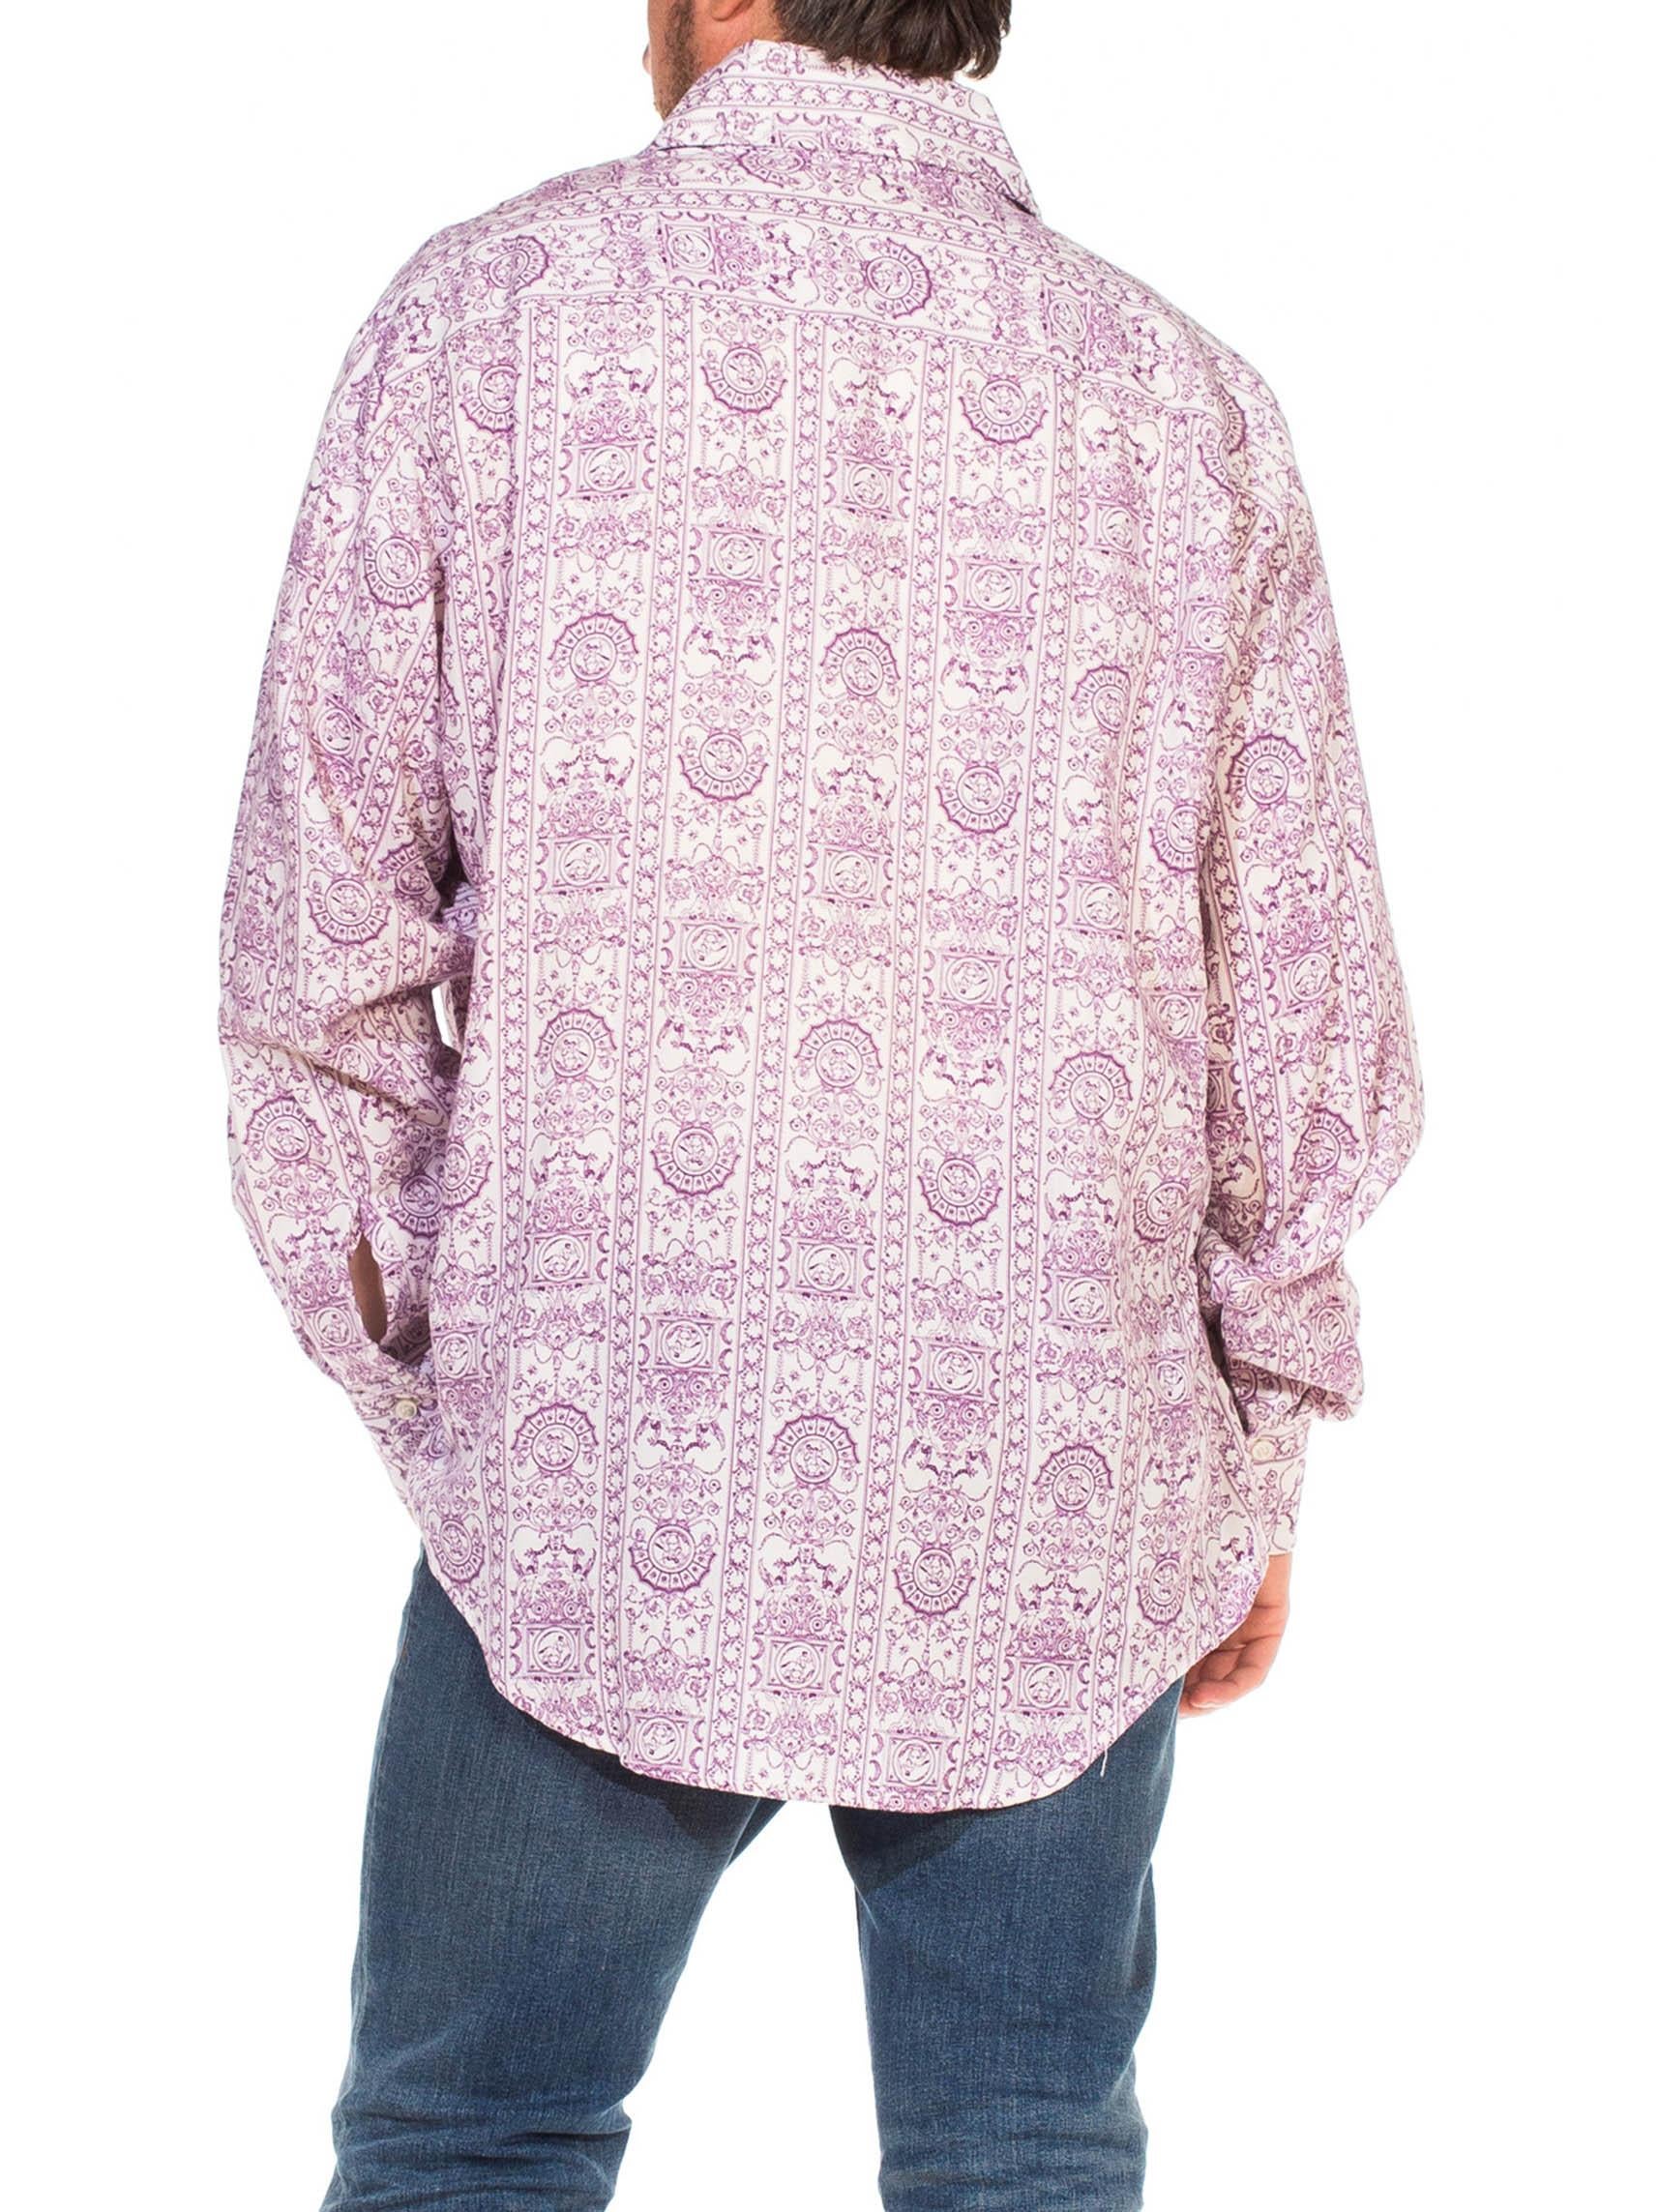 1970S BIG SIR White & Purple Cotton Blend Long Sleeve Medieval Griffin Print Me For Sale 4